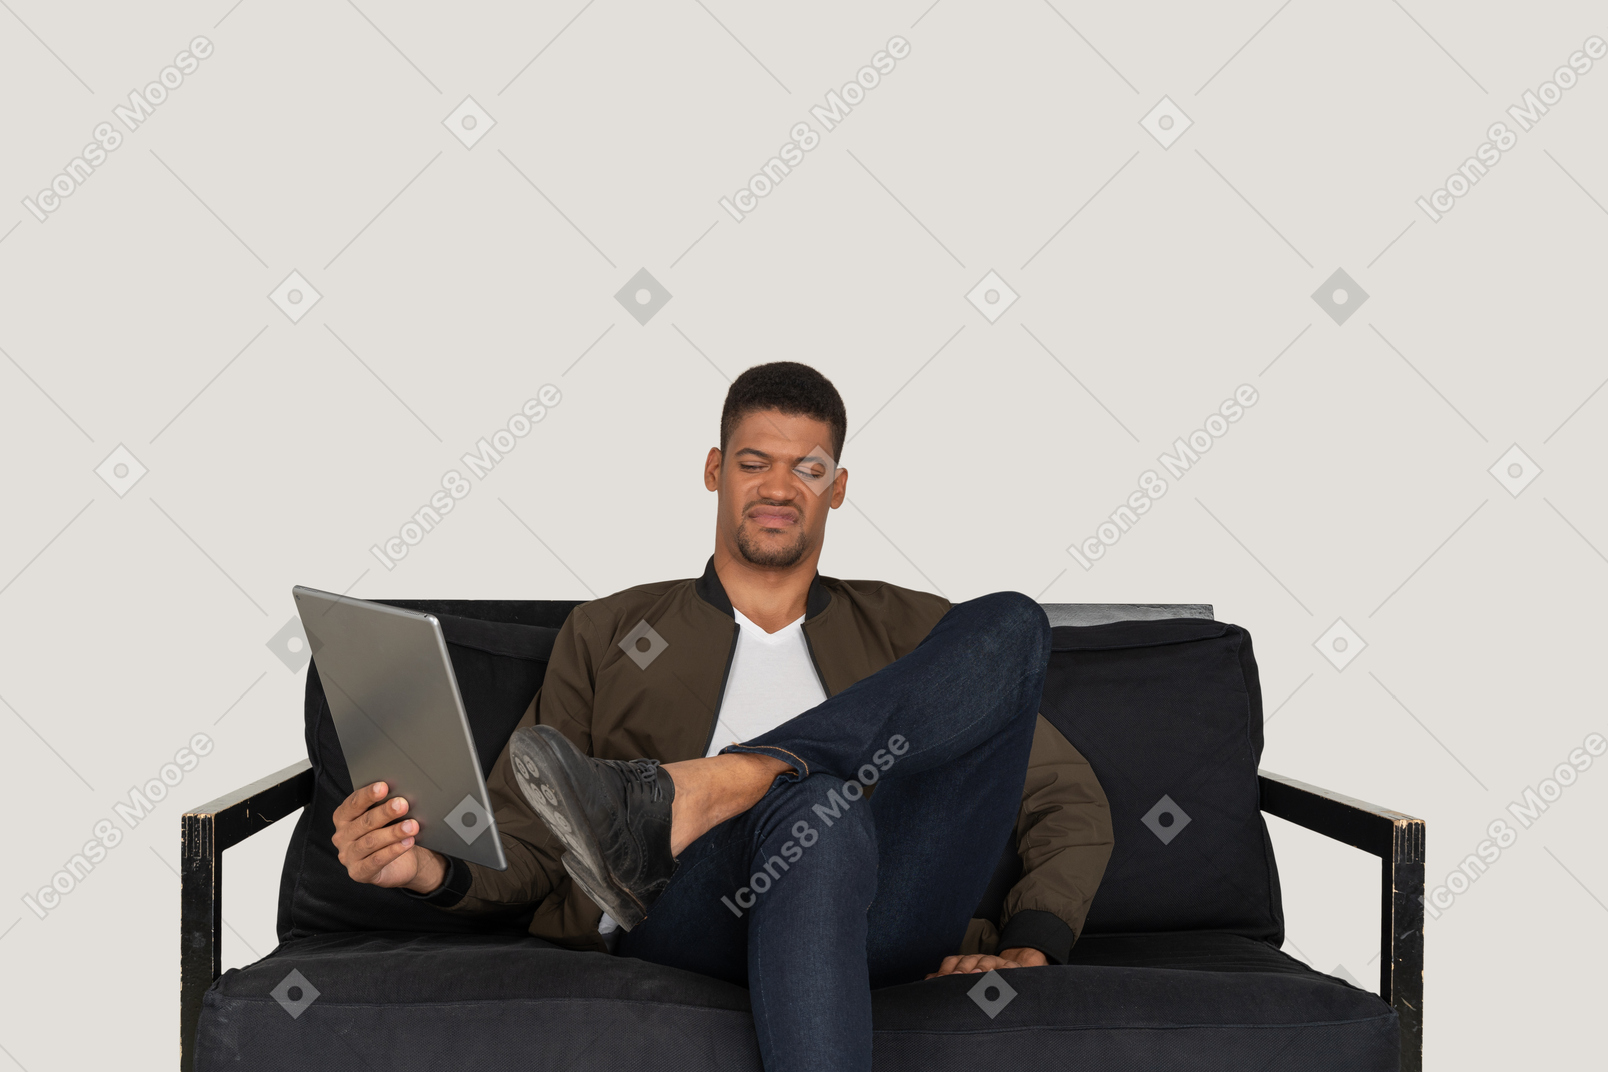 Front view of a grimacing young man sitting on a sofa